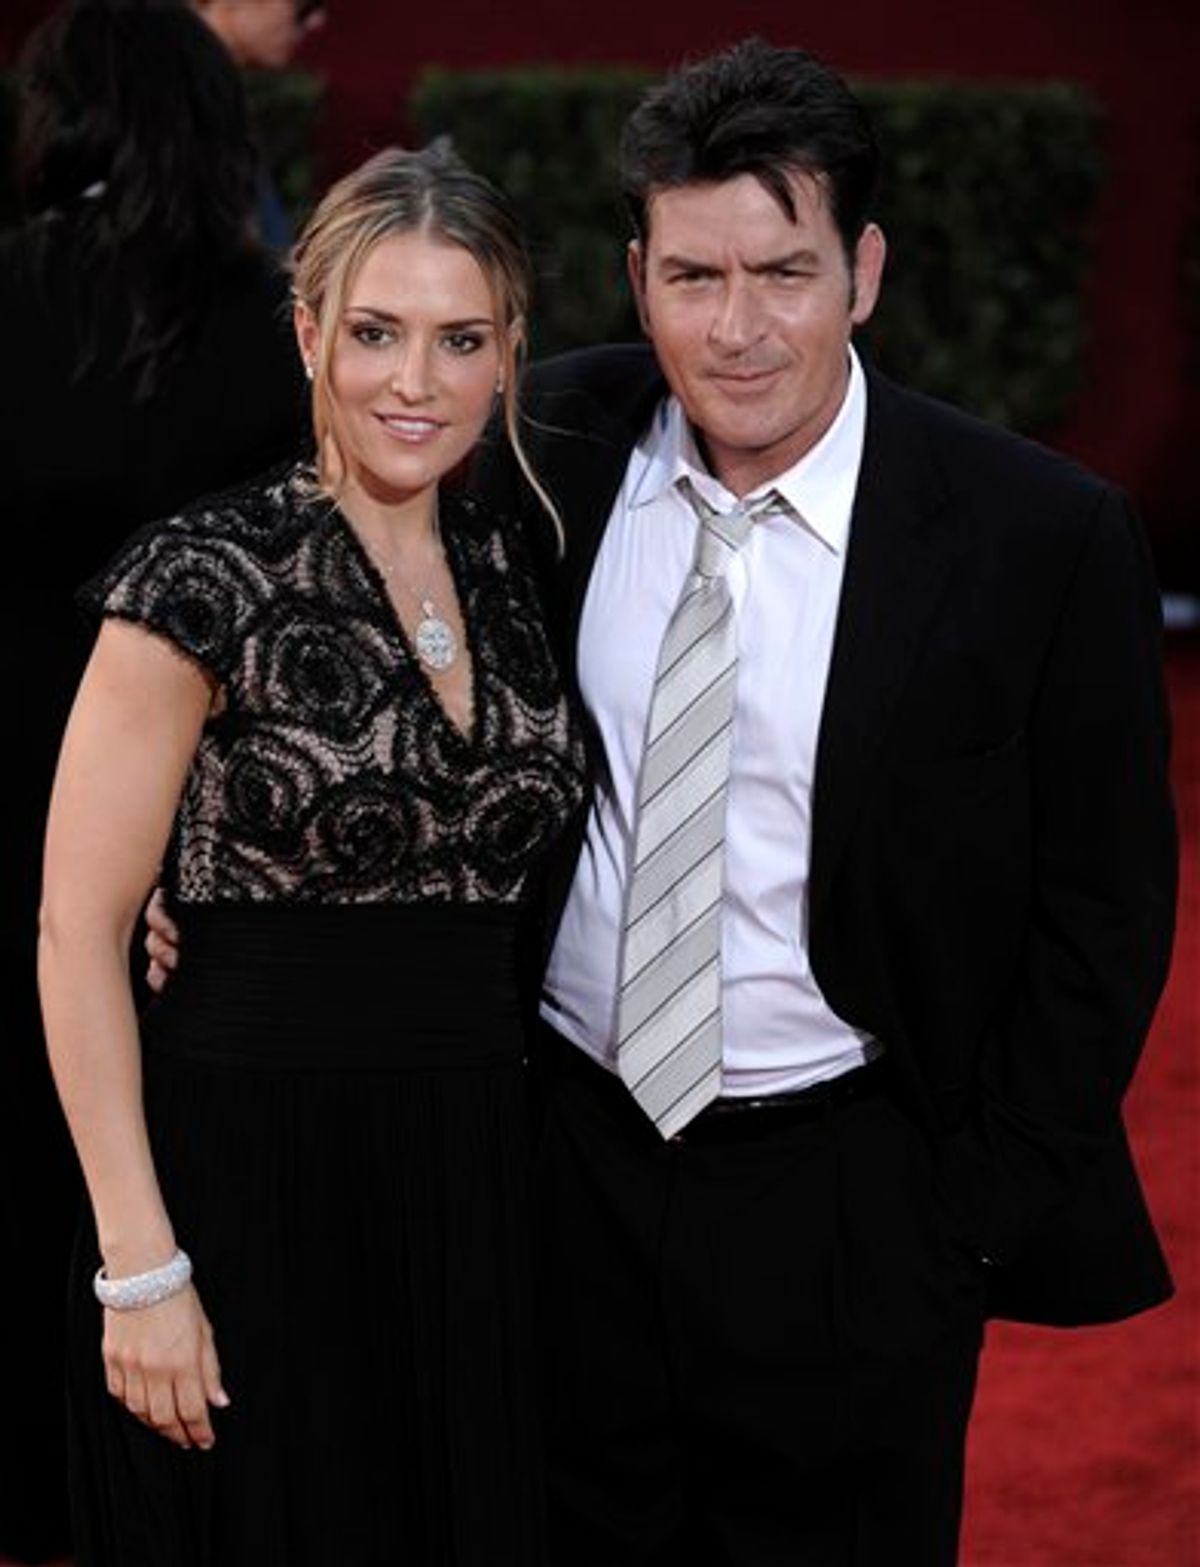 In this Sunday, Sept. 20, 2009, picture, actor Charlie Sheen, right, and wife Brooke Mueller arrive at the 61st Primetime Emmy Awards in Los Angeles. A woman who identified herself as the wife of Charlie Sheen said in a 911 call to Aspen police that the actor threatened her with a knife and that she feared for her life. Police released the audio of the call on Monday, Dec. 28, 2009, three days after Sheen was arrested on suspicion of menacing, second-degree assault and criminal mischief. (AP Photo/Chris Pizzello) (AP)